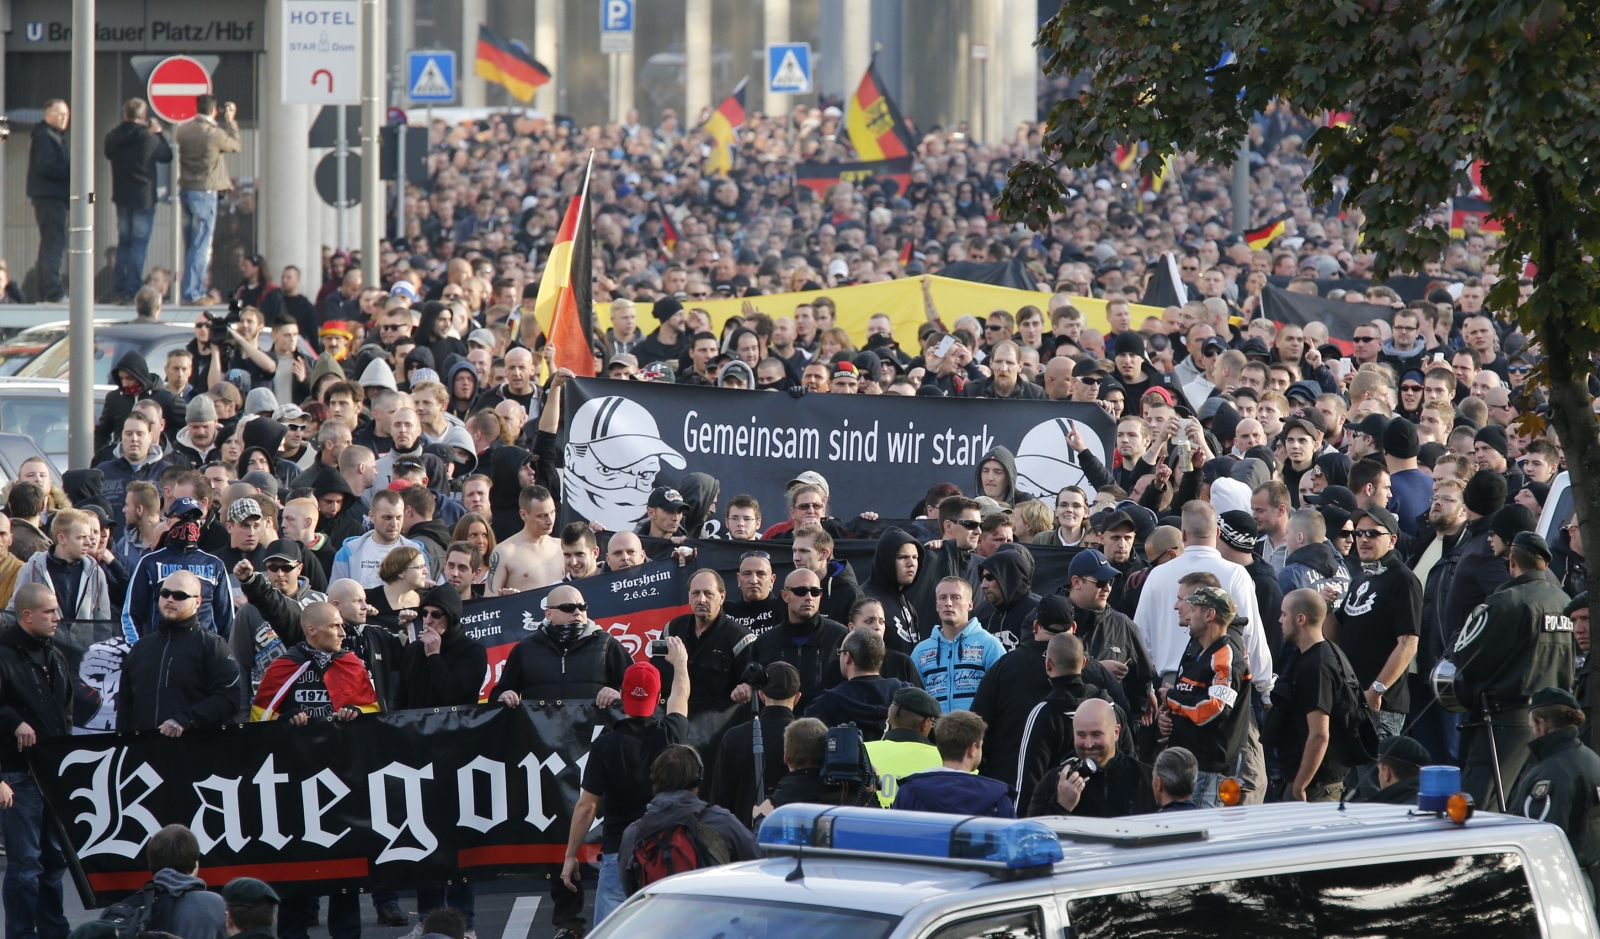 hooligans against Salafists and Islamic State extremist Cologne